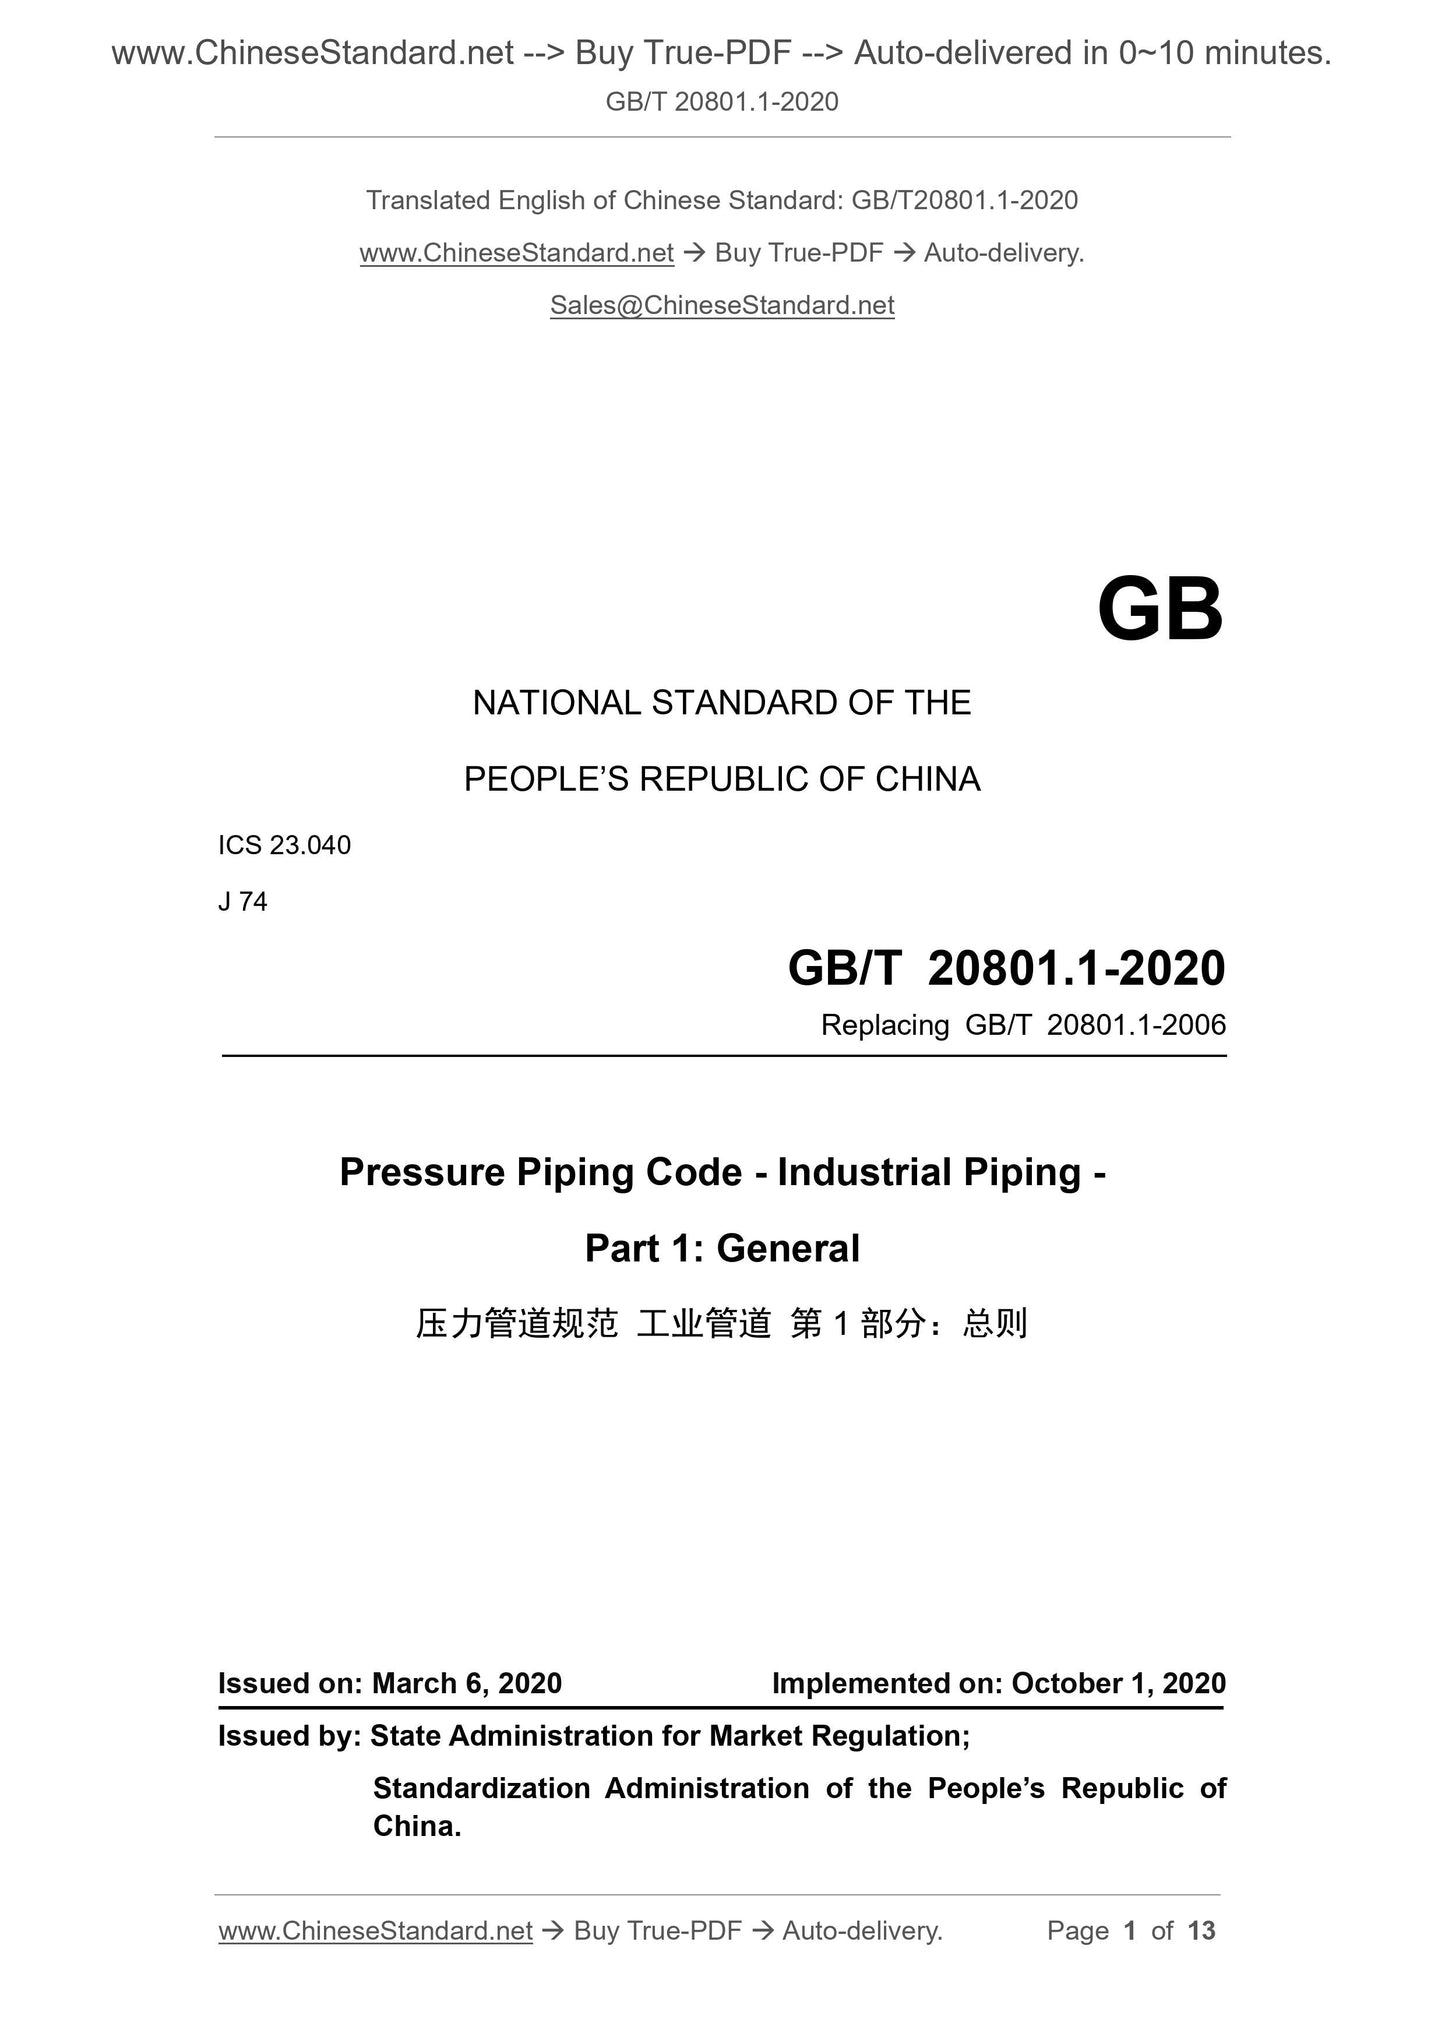 GB/T 20801.1-2020 Page 1